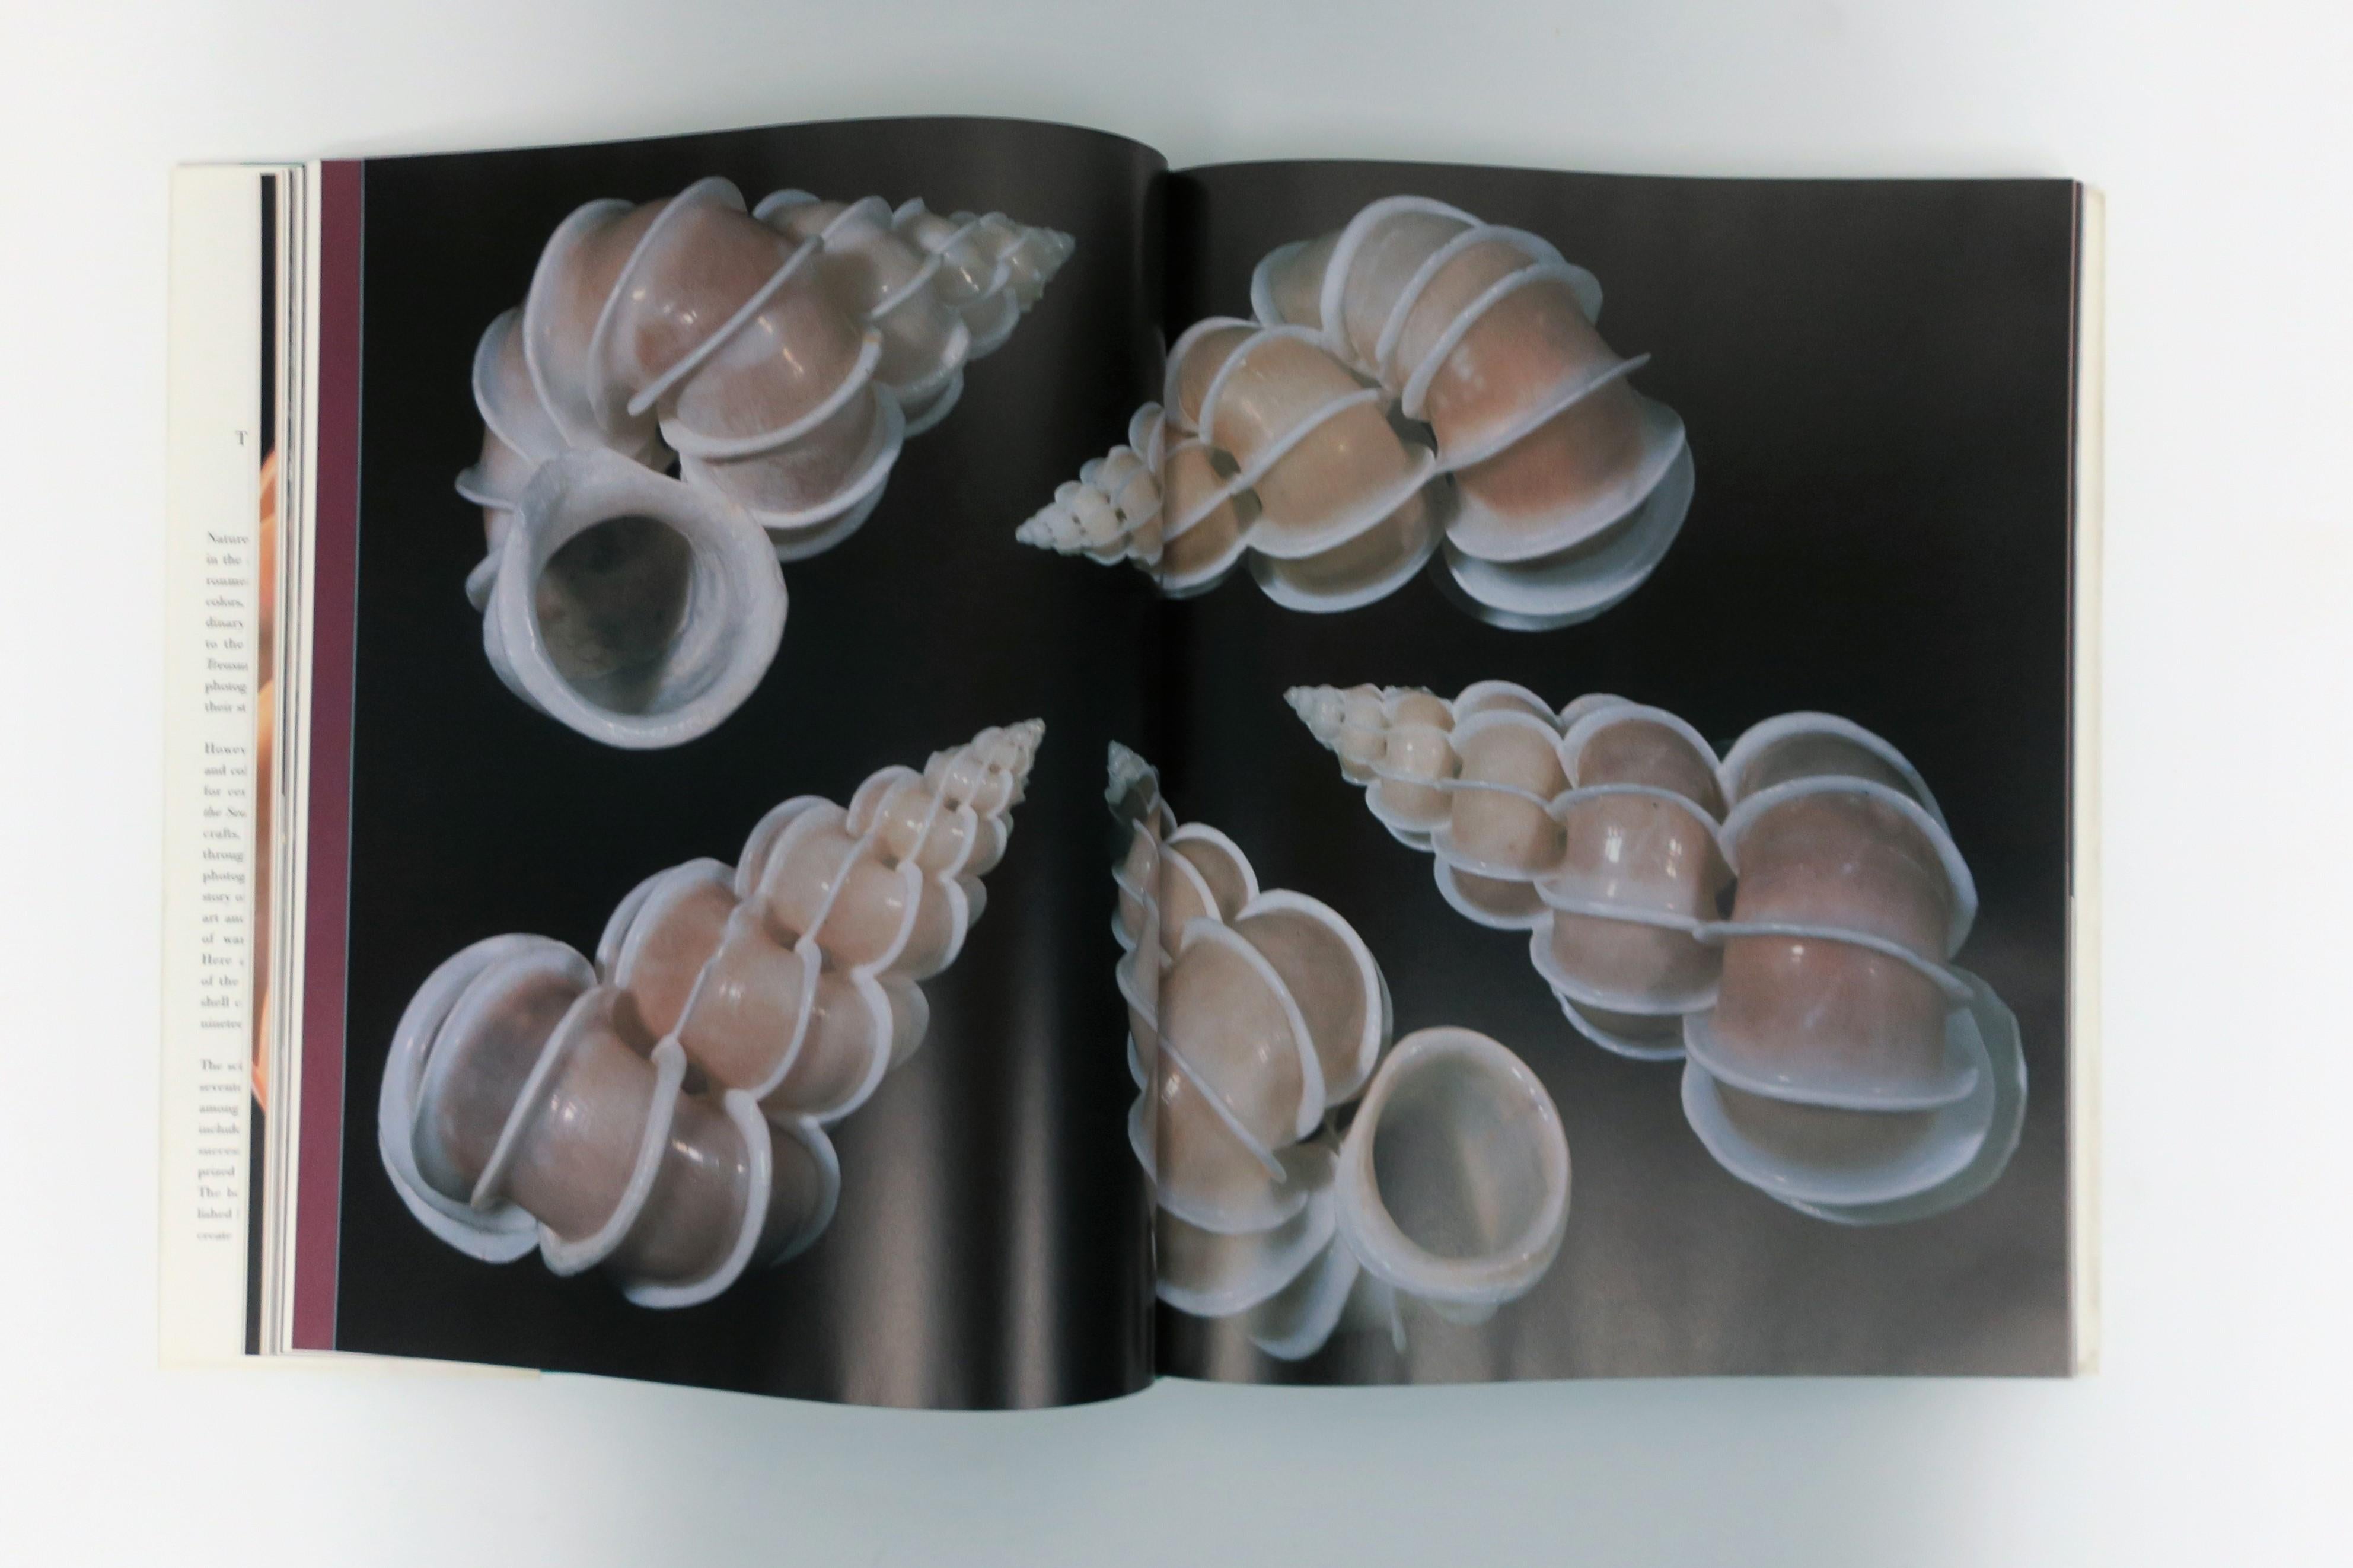 Shells 'Treasures of the Sea' Sea Shell Library or Coffee Table Book, ca. 1990s 7